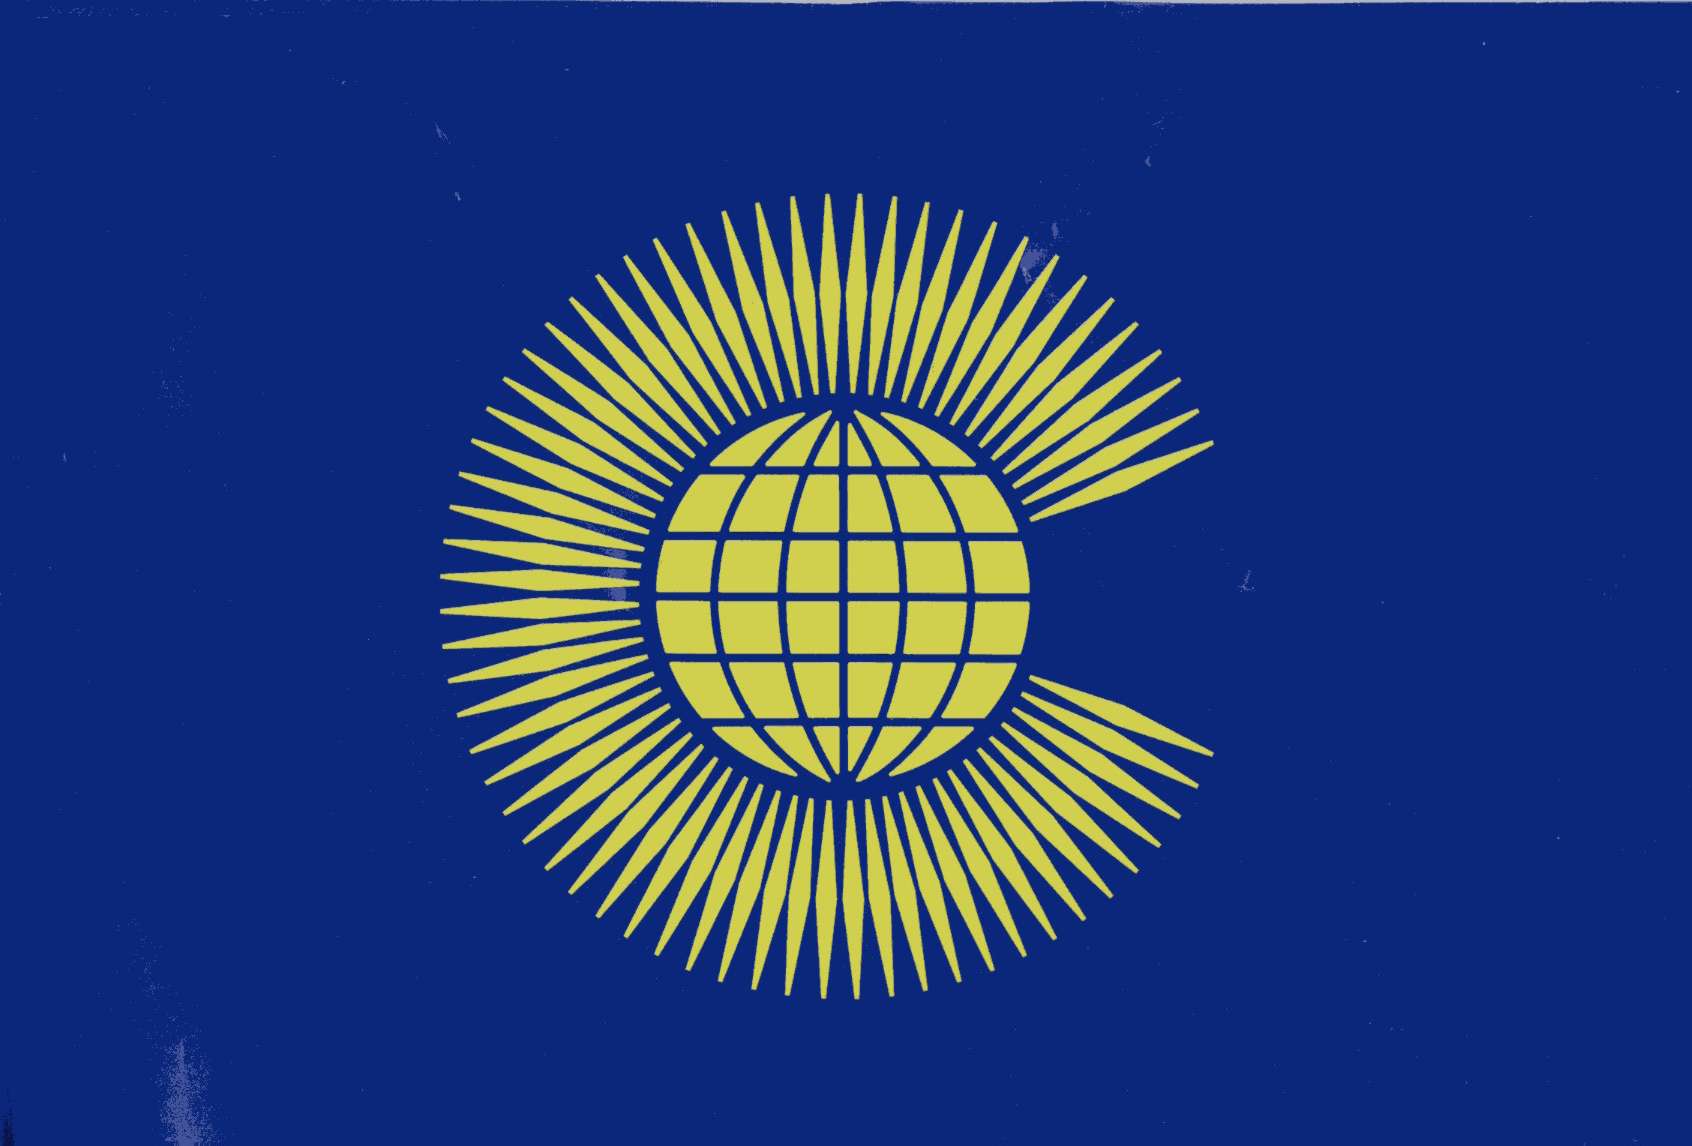 The Commonwealth was urged today, in a Parliamentary debate about modern slavery and human trafficking, to mobilise the 2 billion people who live in Commonwealth countries  both demonstrating its values and giving hope to millions of benighted and downtrodden people